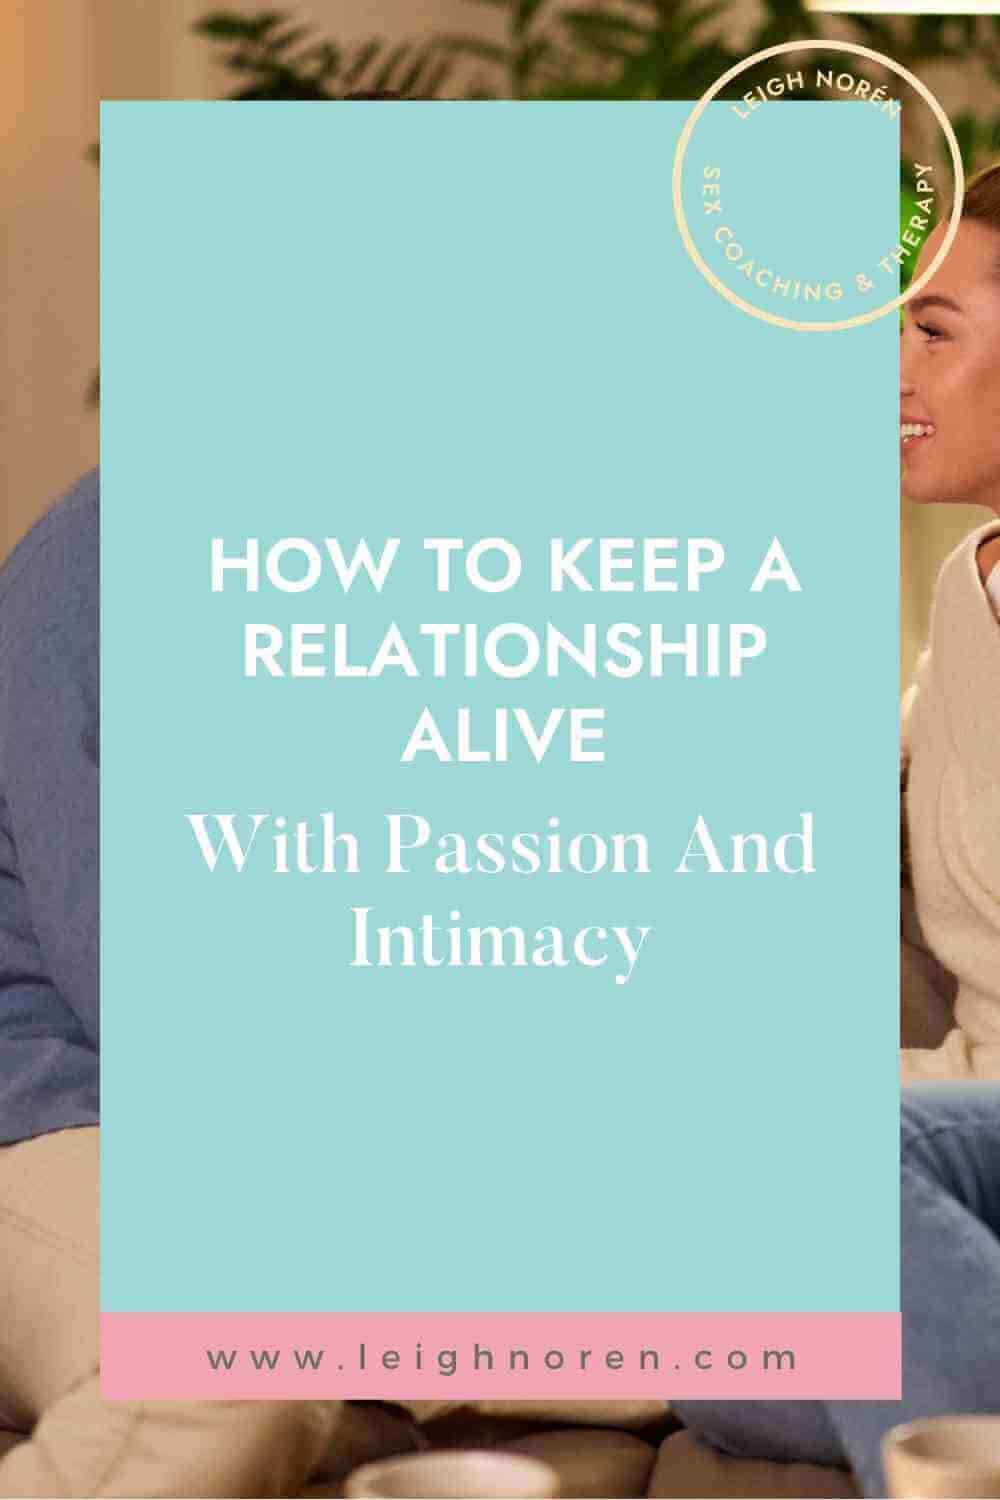 How To Keep A Relationship Alive With Passion And Intimacy